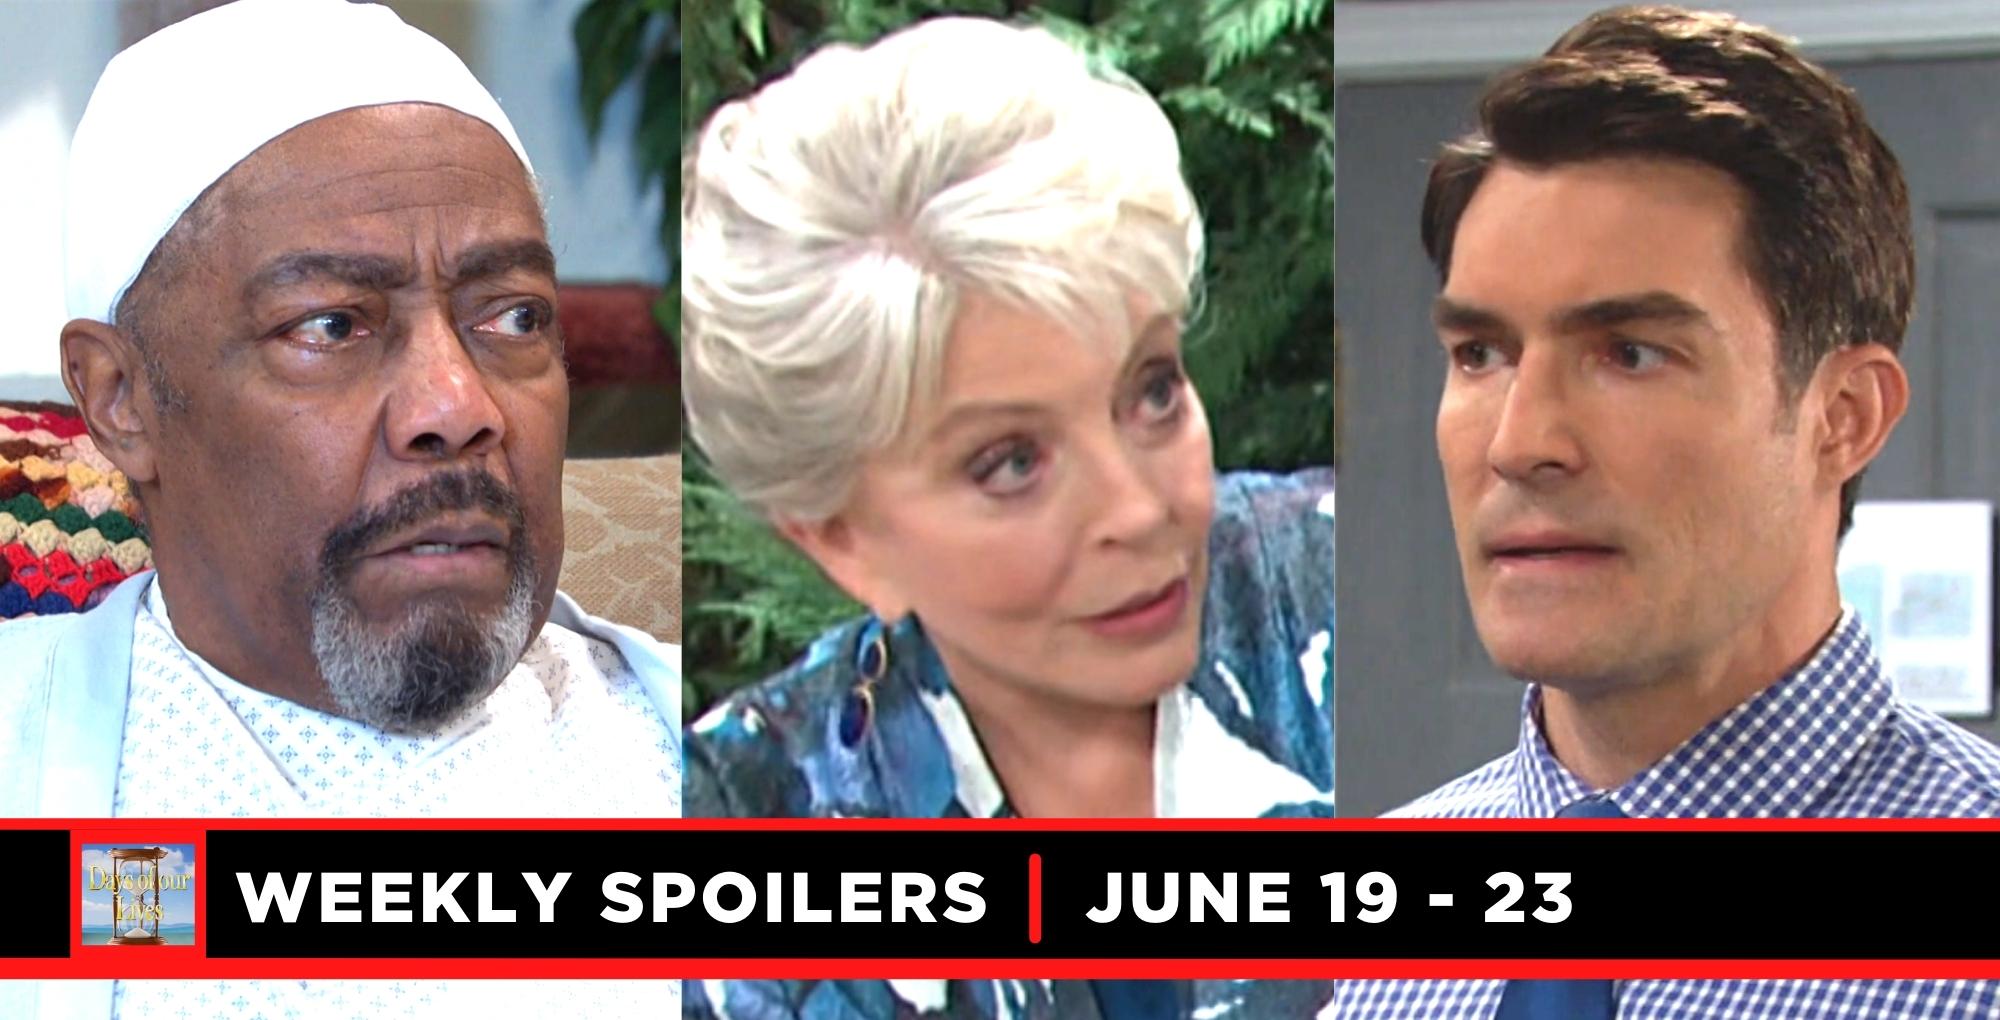 days of our lives spoilers for june 19 – june 23, 2023, three images, abe, julie, dimitri.